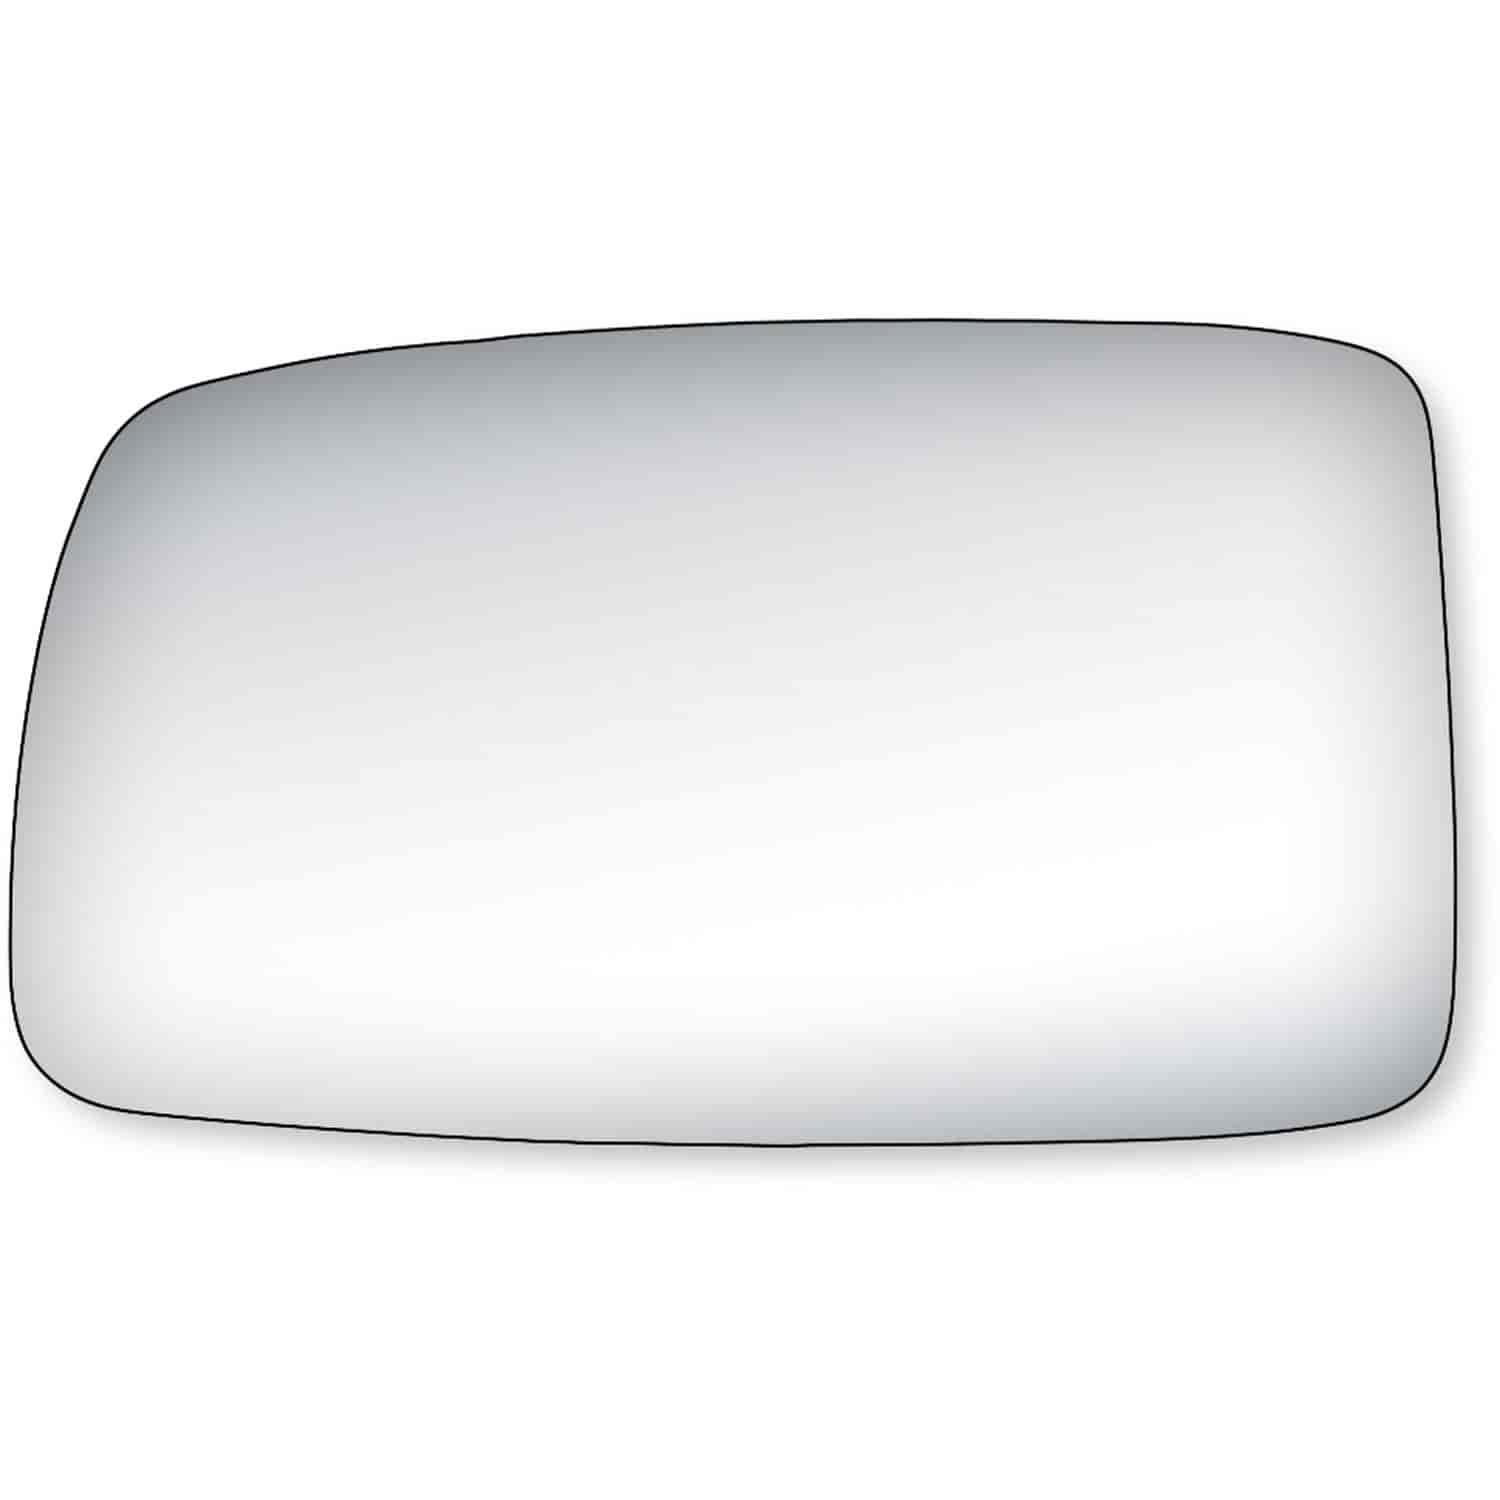 Replacement Glass for 02-07 Lancer ES LS Wagon Evolution the glass measures 3 15/16 tall by 6 15/16